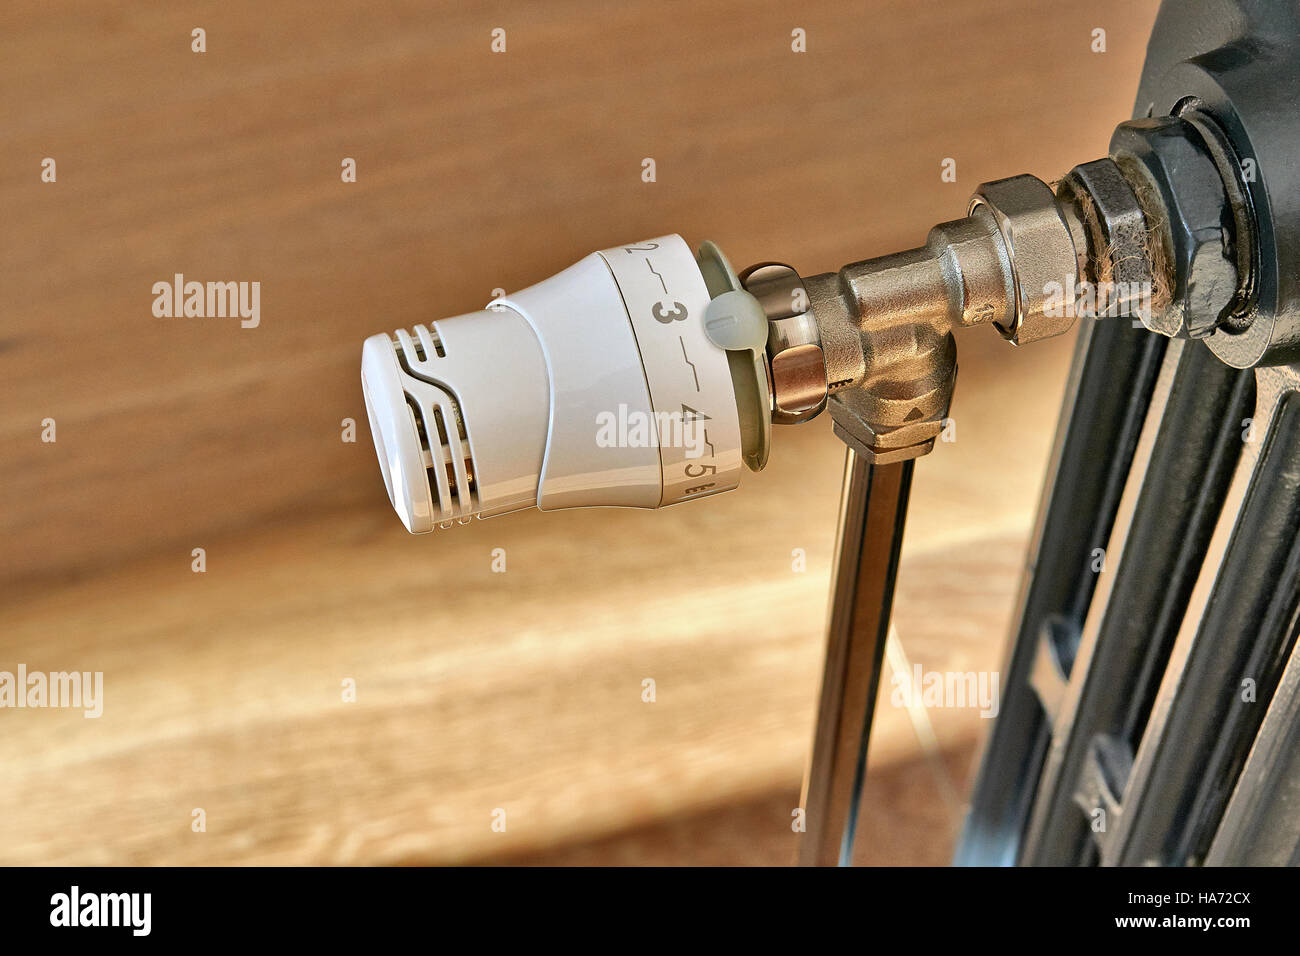 New valve on a old radiator in domestic room Stock Photo